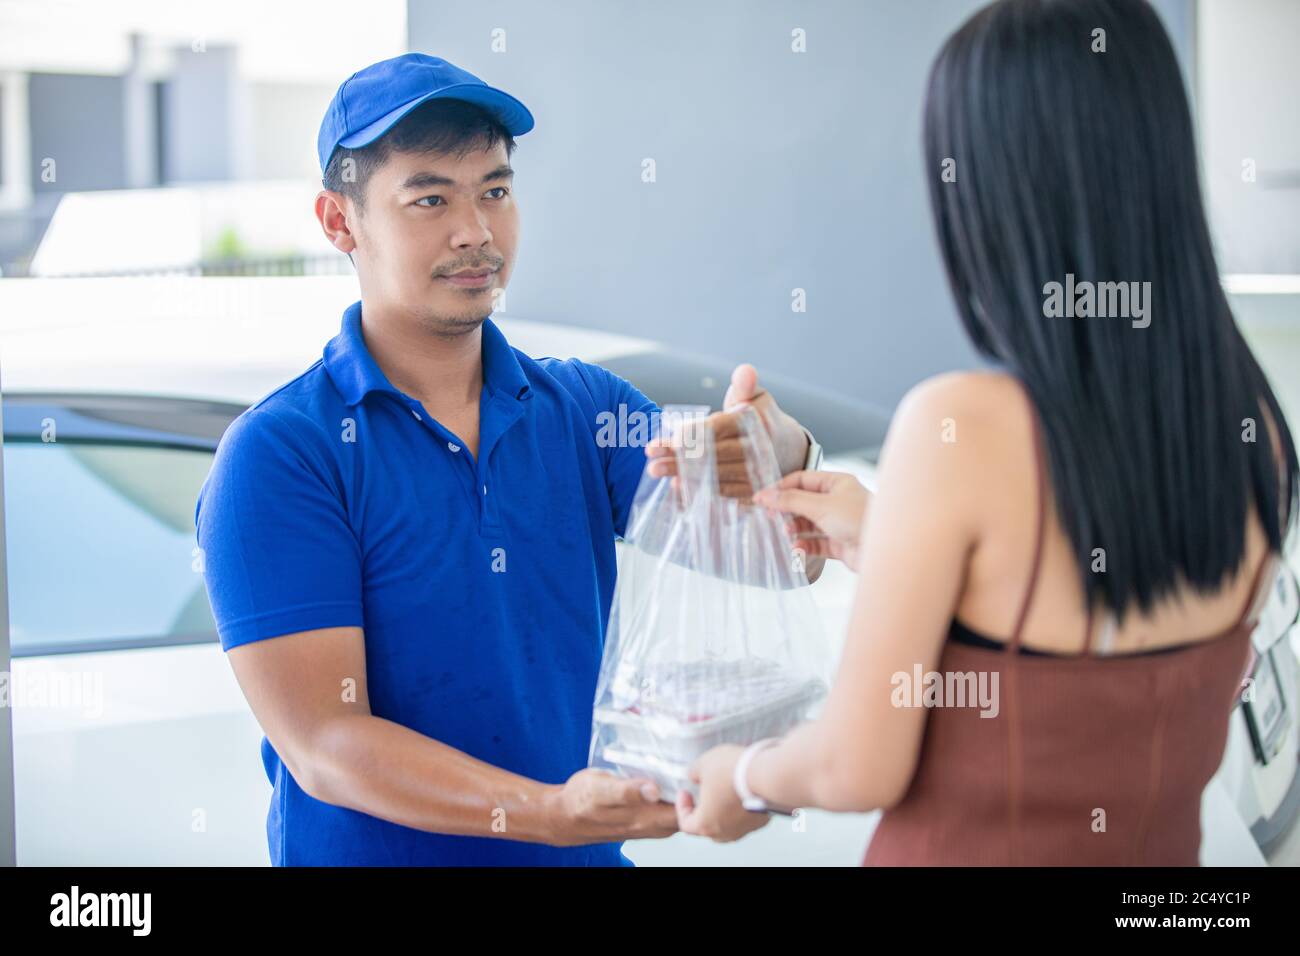 Asian delivery servicemen wearing a blue uniform with a blue cap and handling food boxes in plastic bags to give to the customer in front of the house Stock Photo